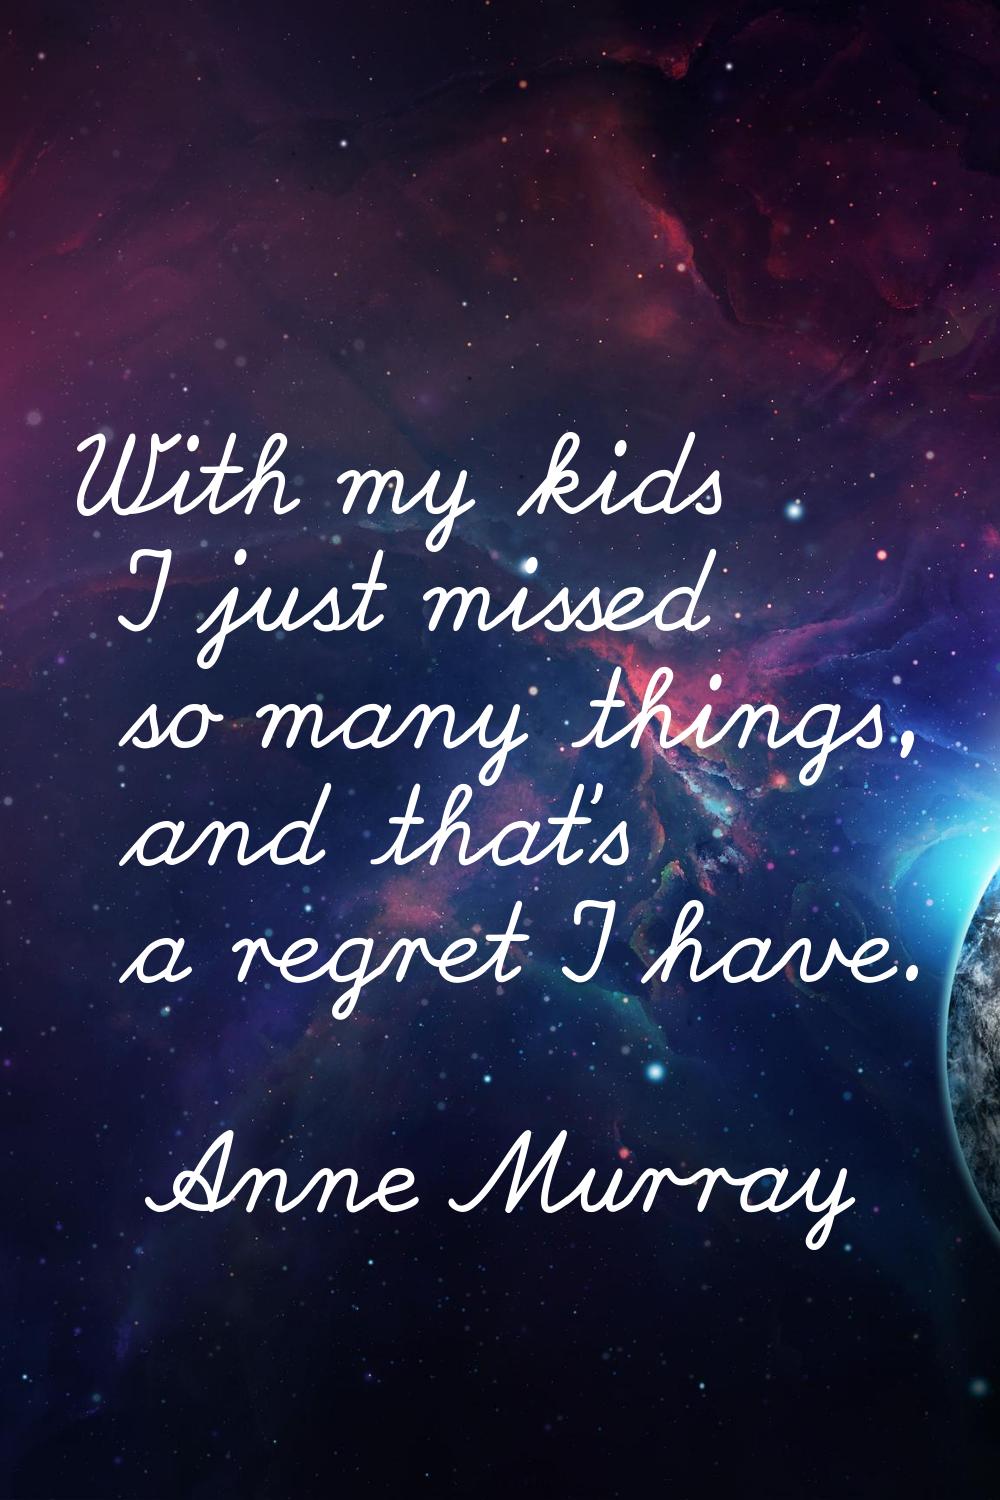 With my kids I just missed so many things, and that's a regret I have.